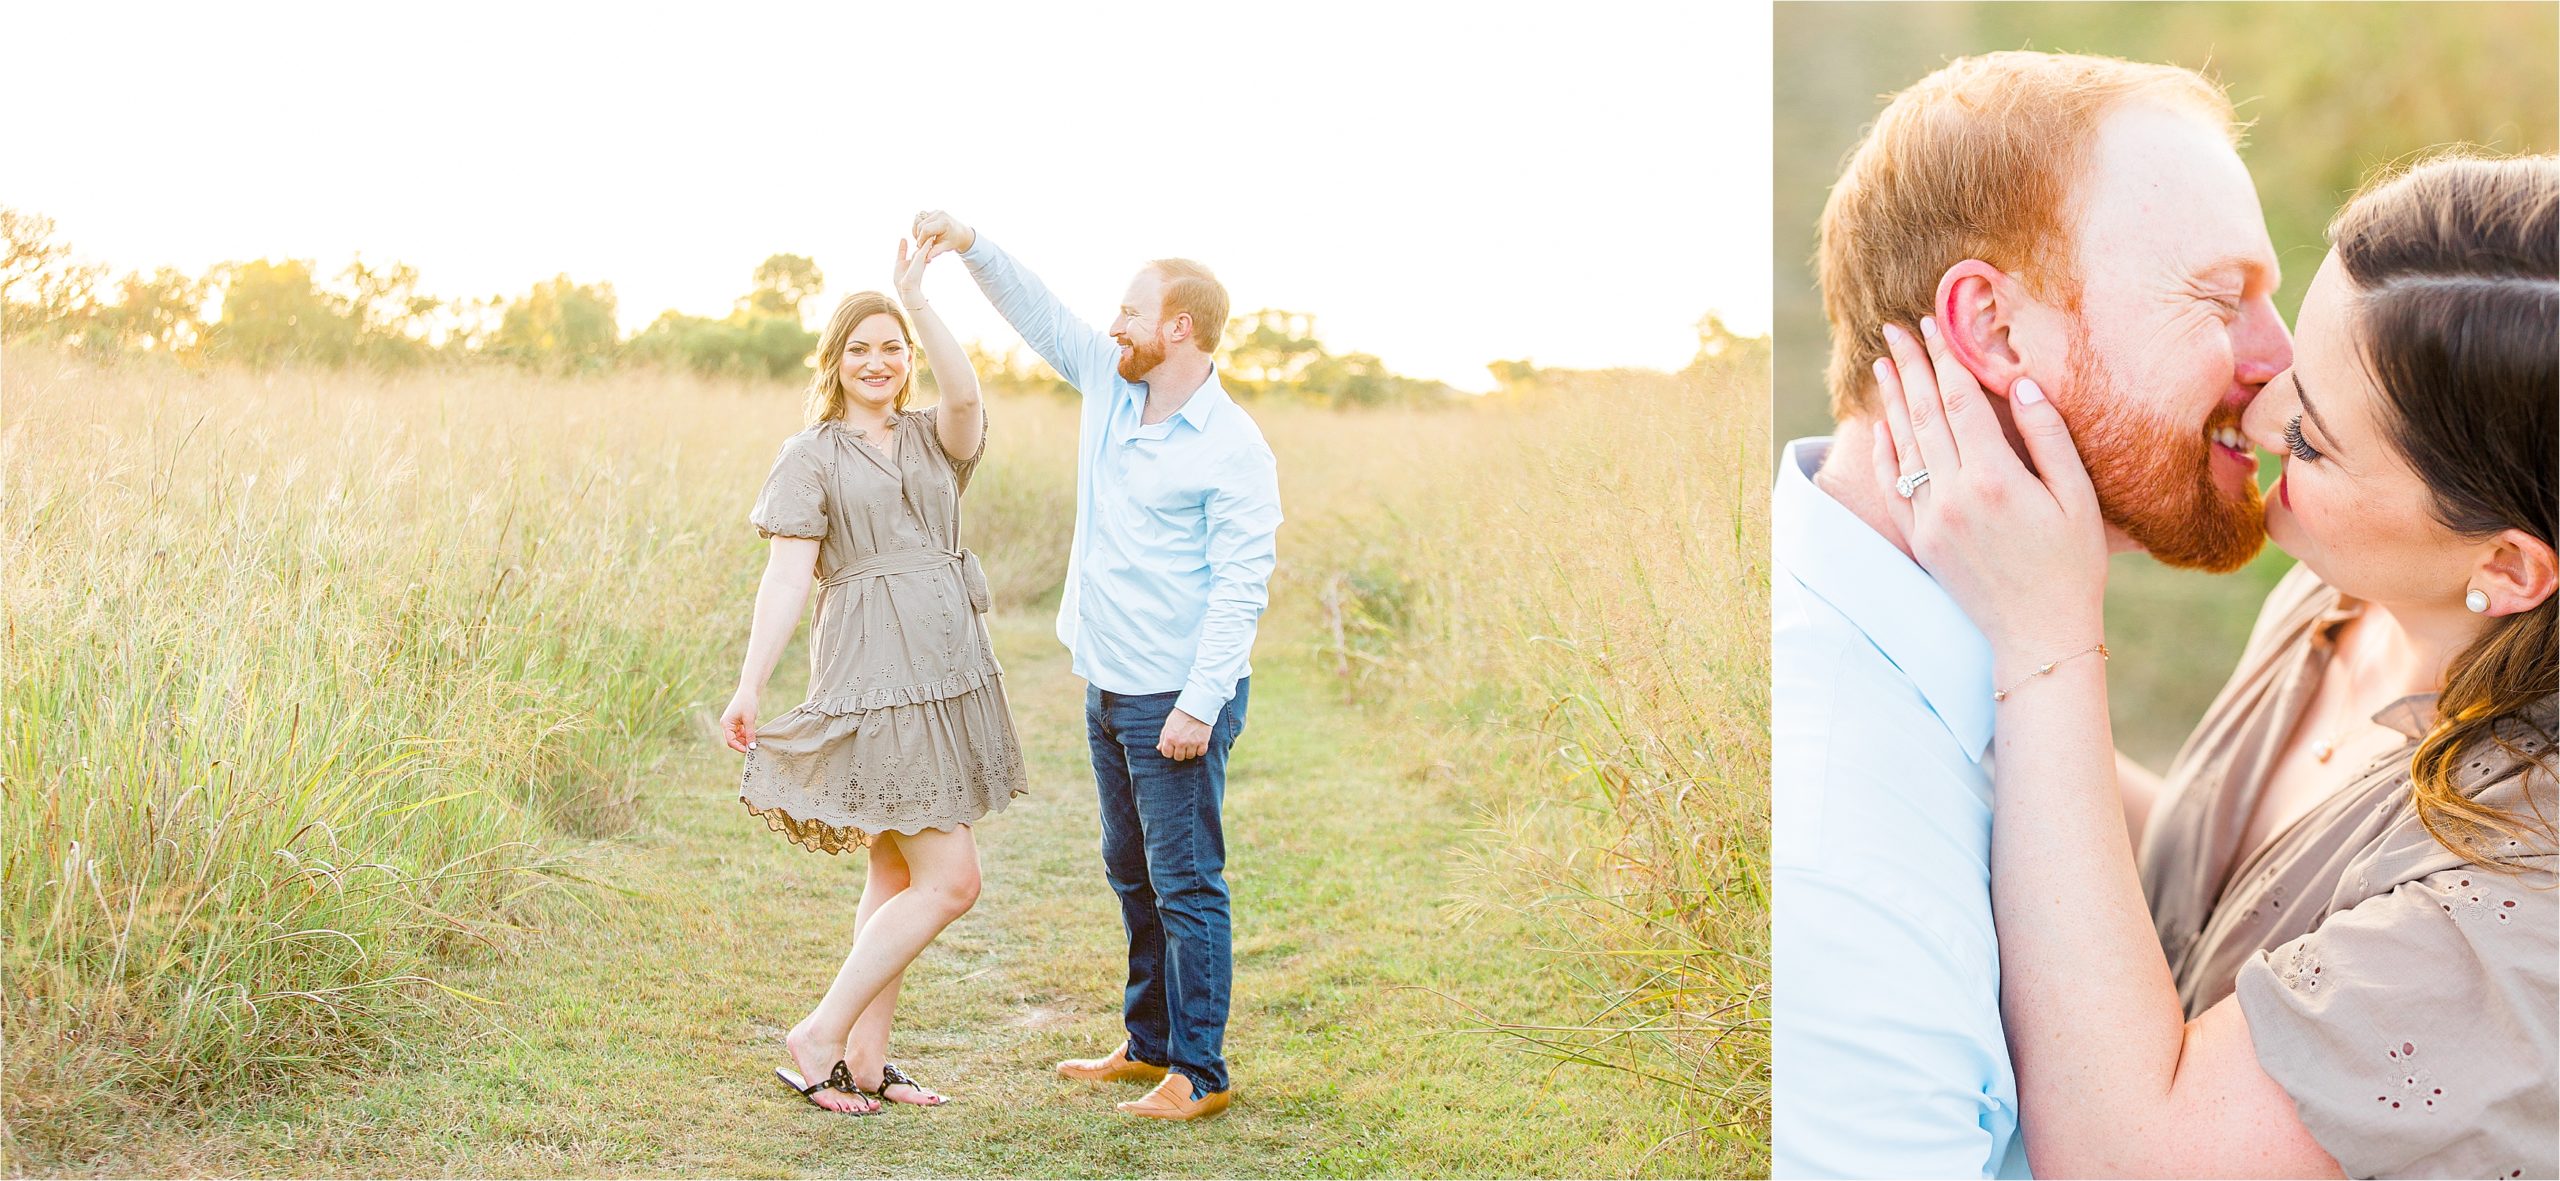 A couple dances and shares kisses in a field surrounded by tall grass during their sunset engagement at Cibolo Creek Nature Center in Boerne, Texas